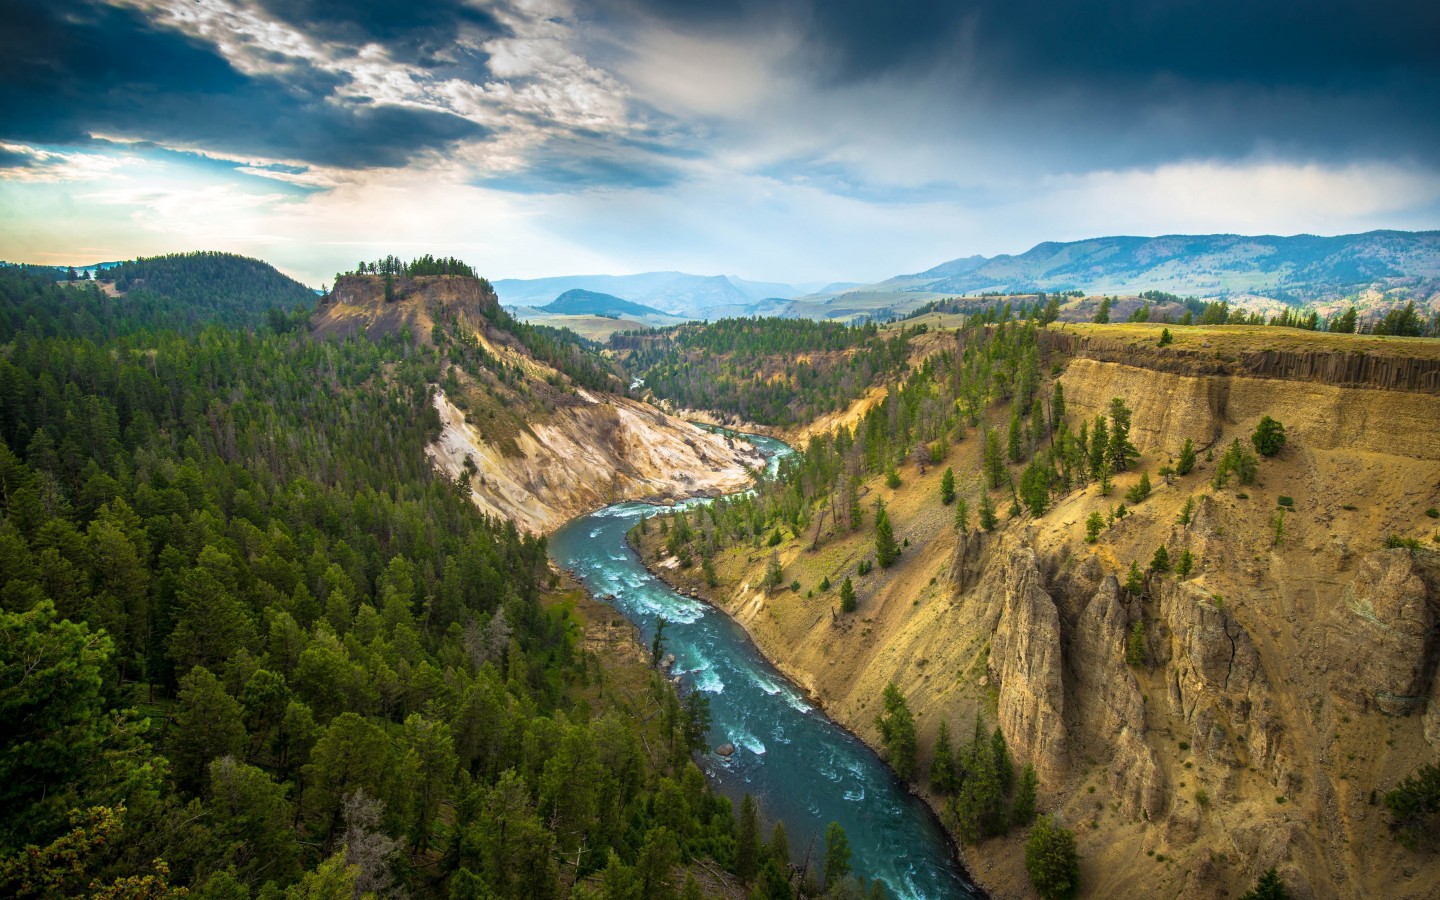 The River, Grand Canyon of Yellowstone National Park, USA Wallpaper for Desktop 1440x900